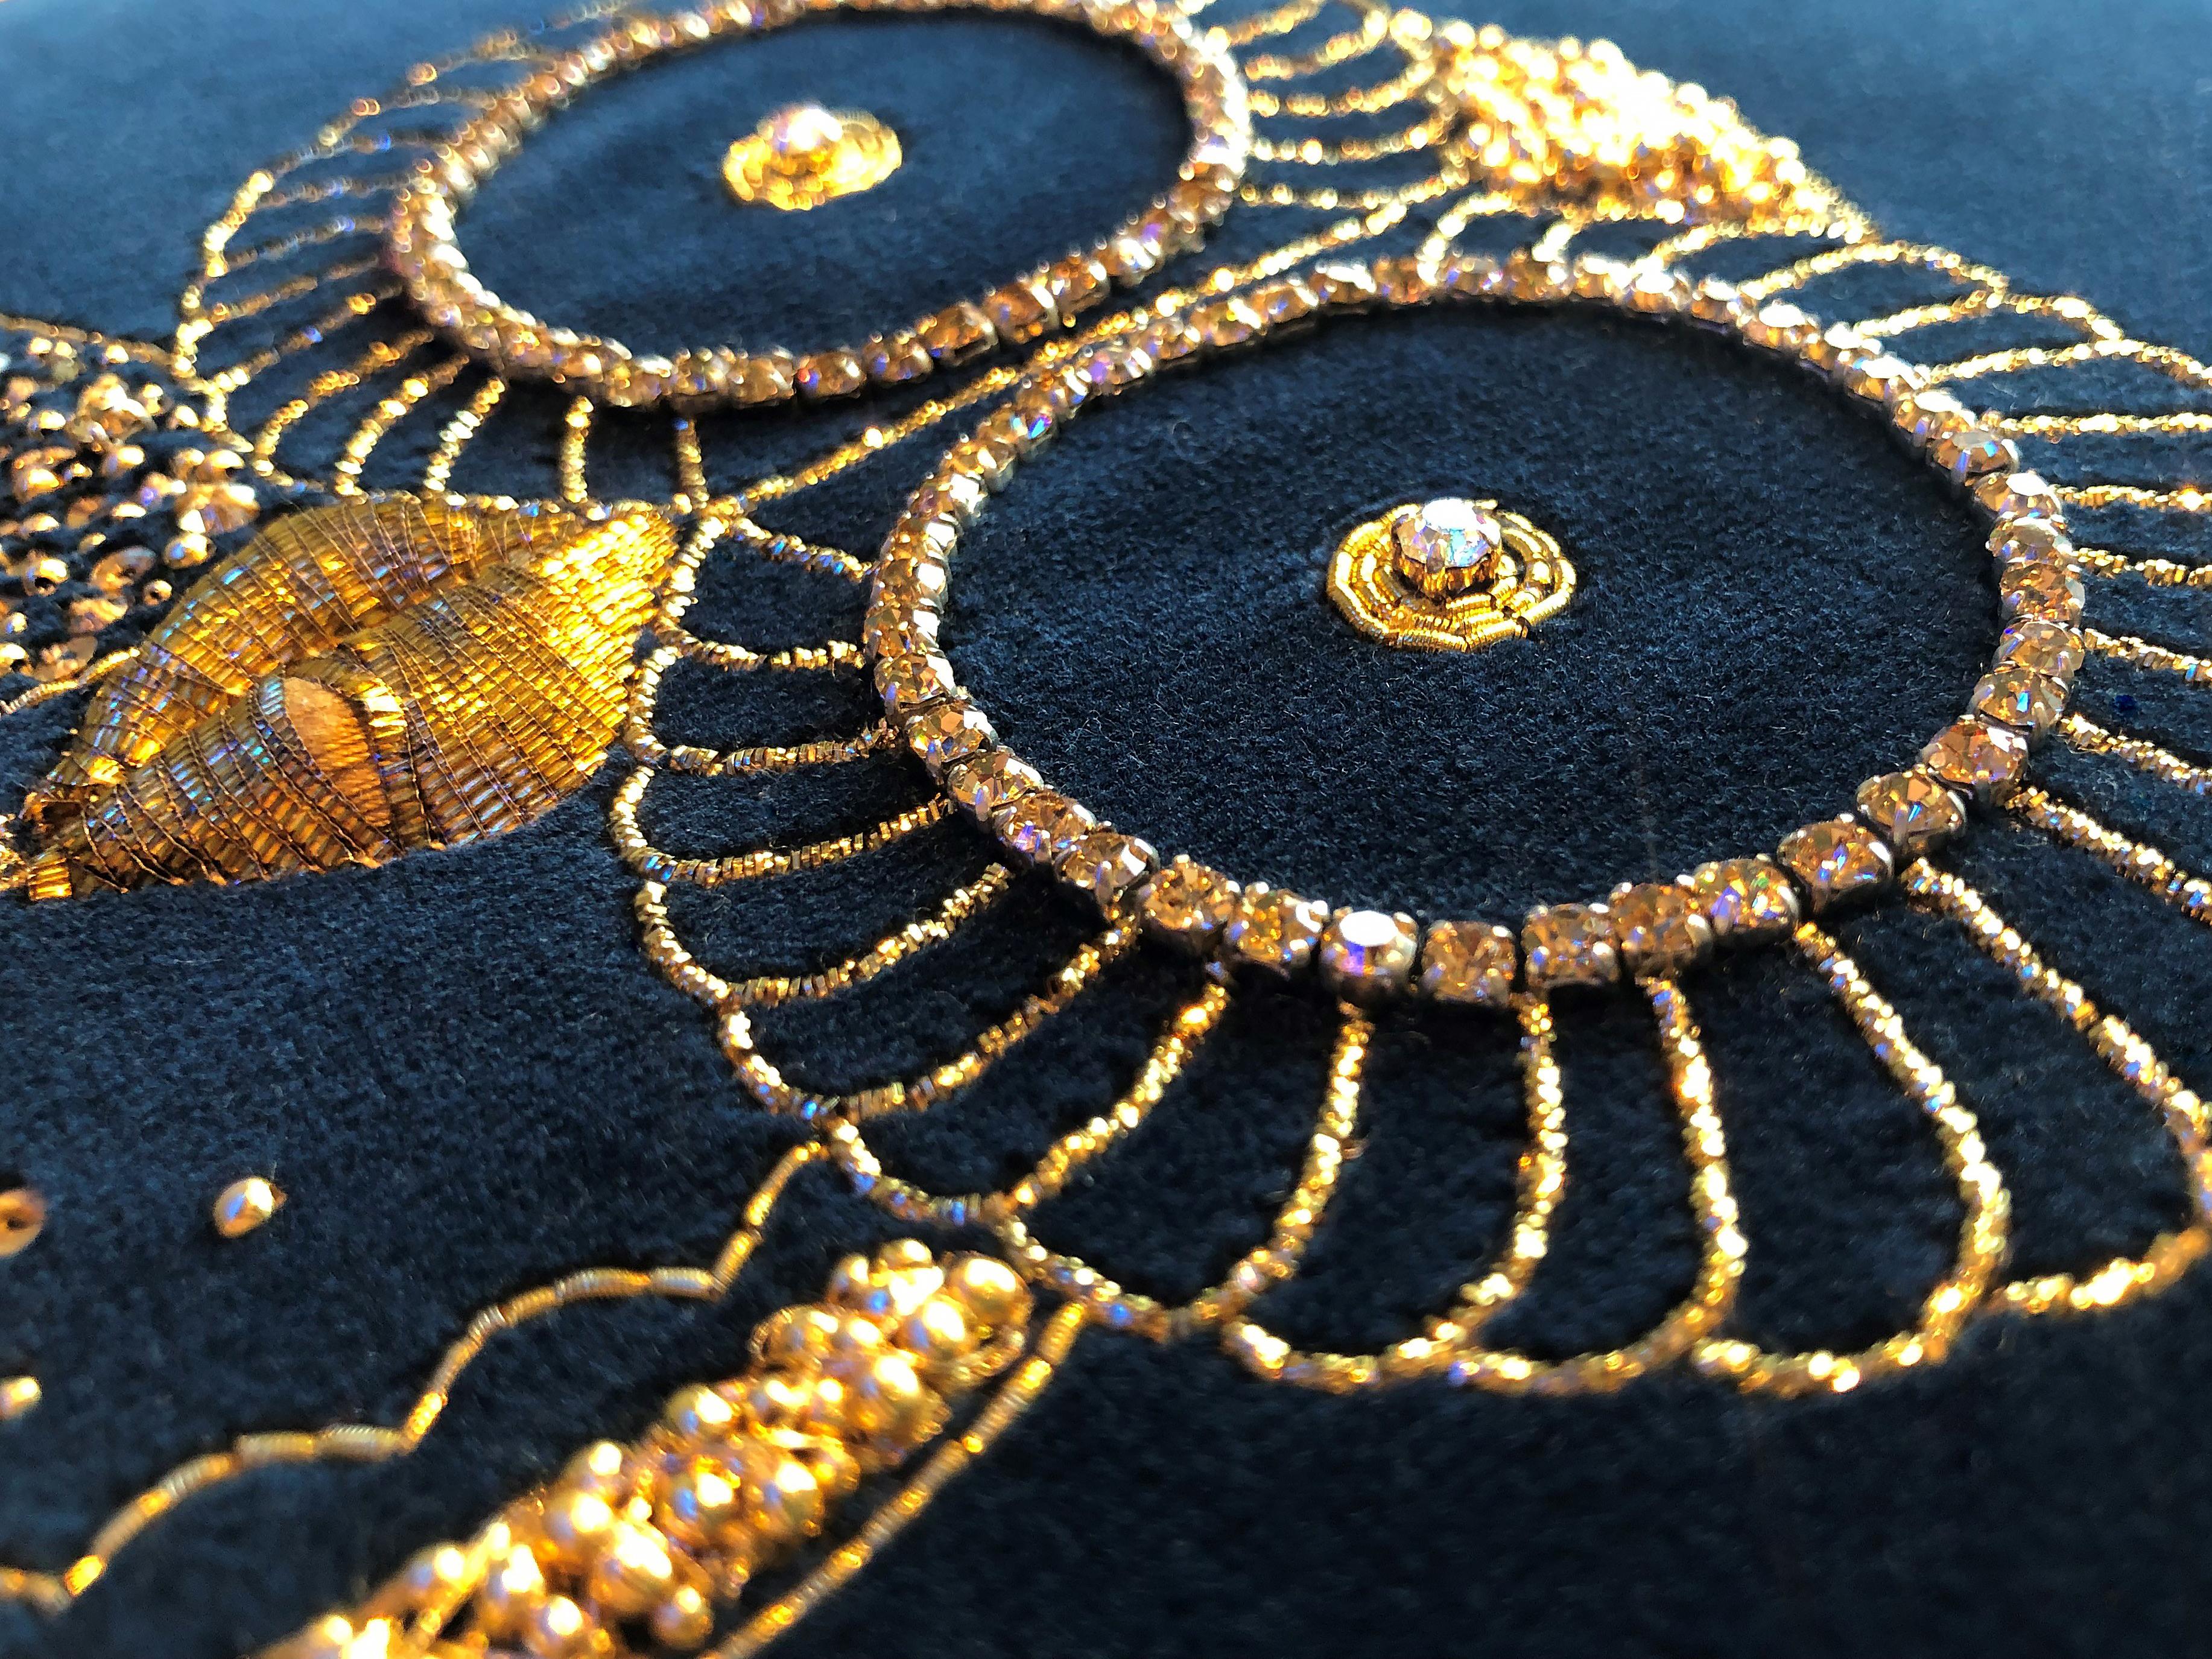 Luxury cushion in deep navy velvet material, featuring handmade embroidery by Lesage in crystals with antique gold thread and gold rope. 

The cushions can be made completely bespoke and perhaps epitomize a movement now to bring back embroidery